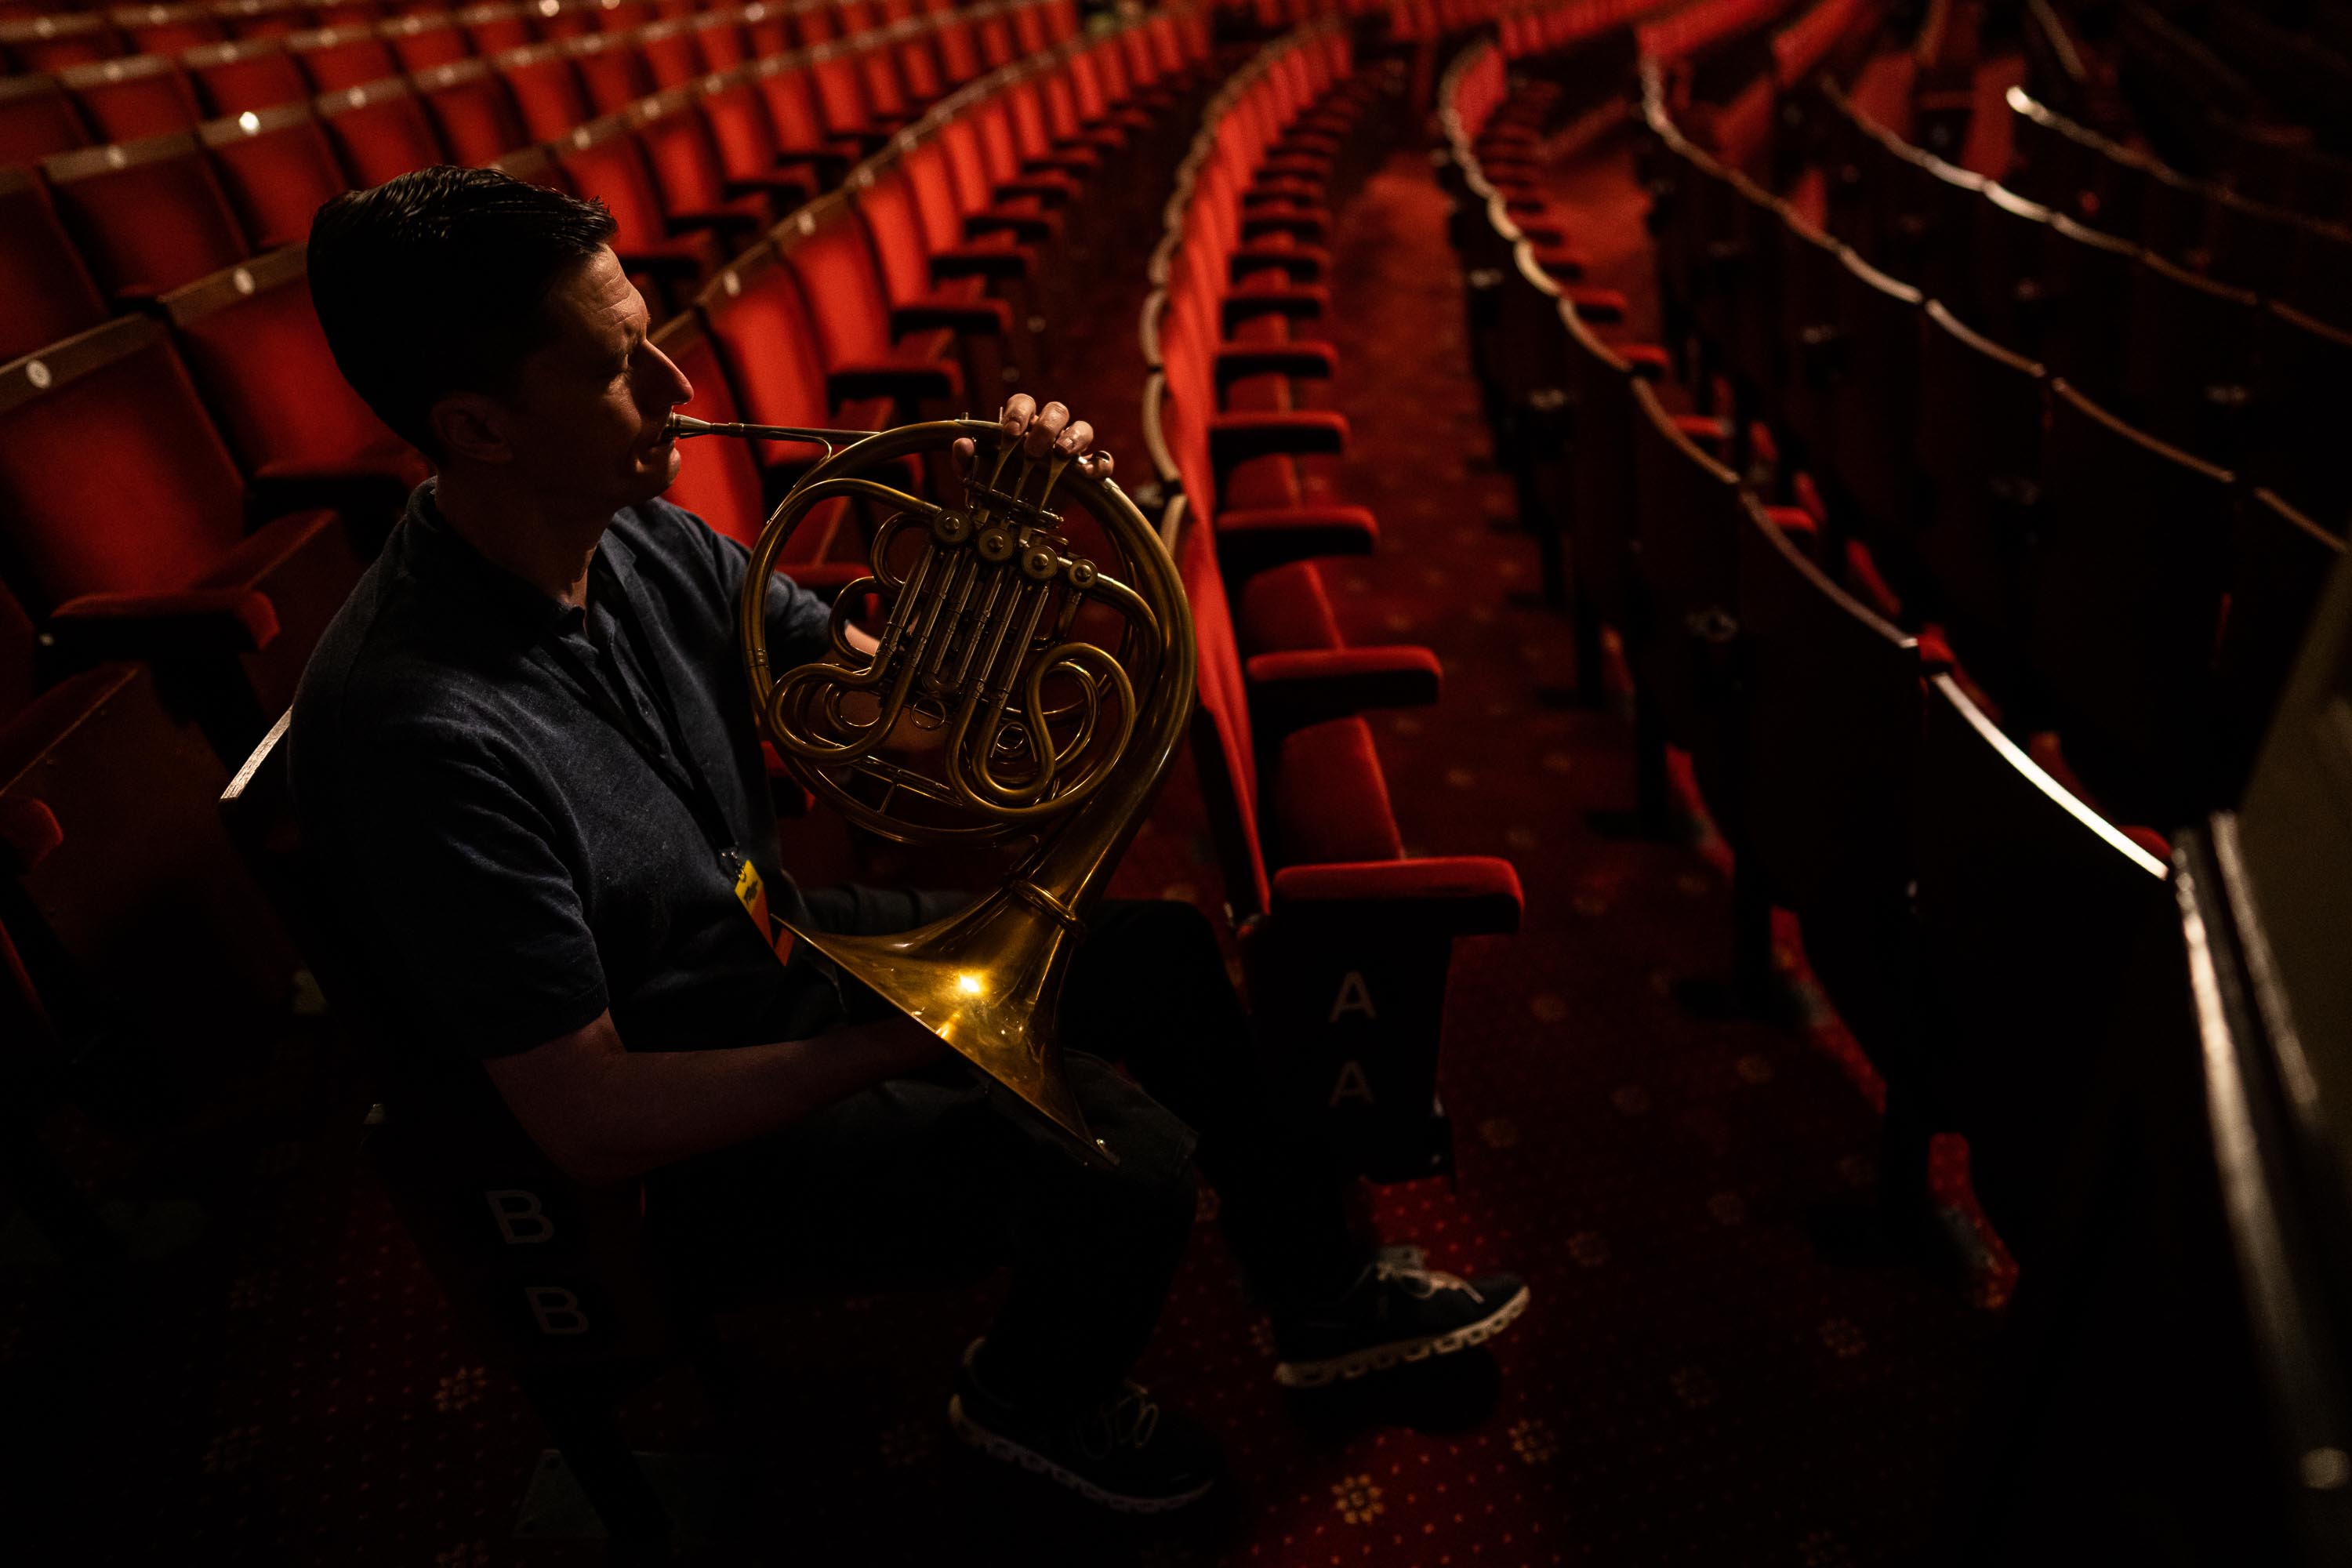 Horn player Christopher Dwyer warms up in the auditorium’s seats